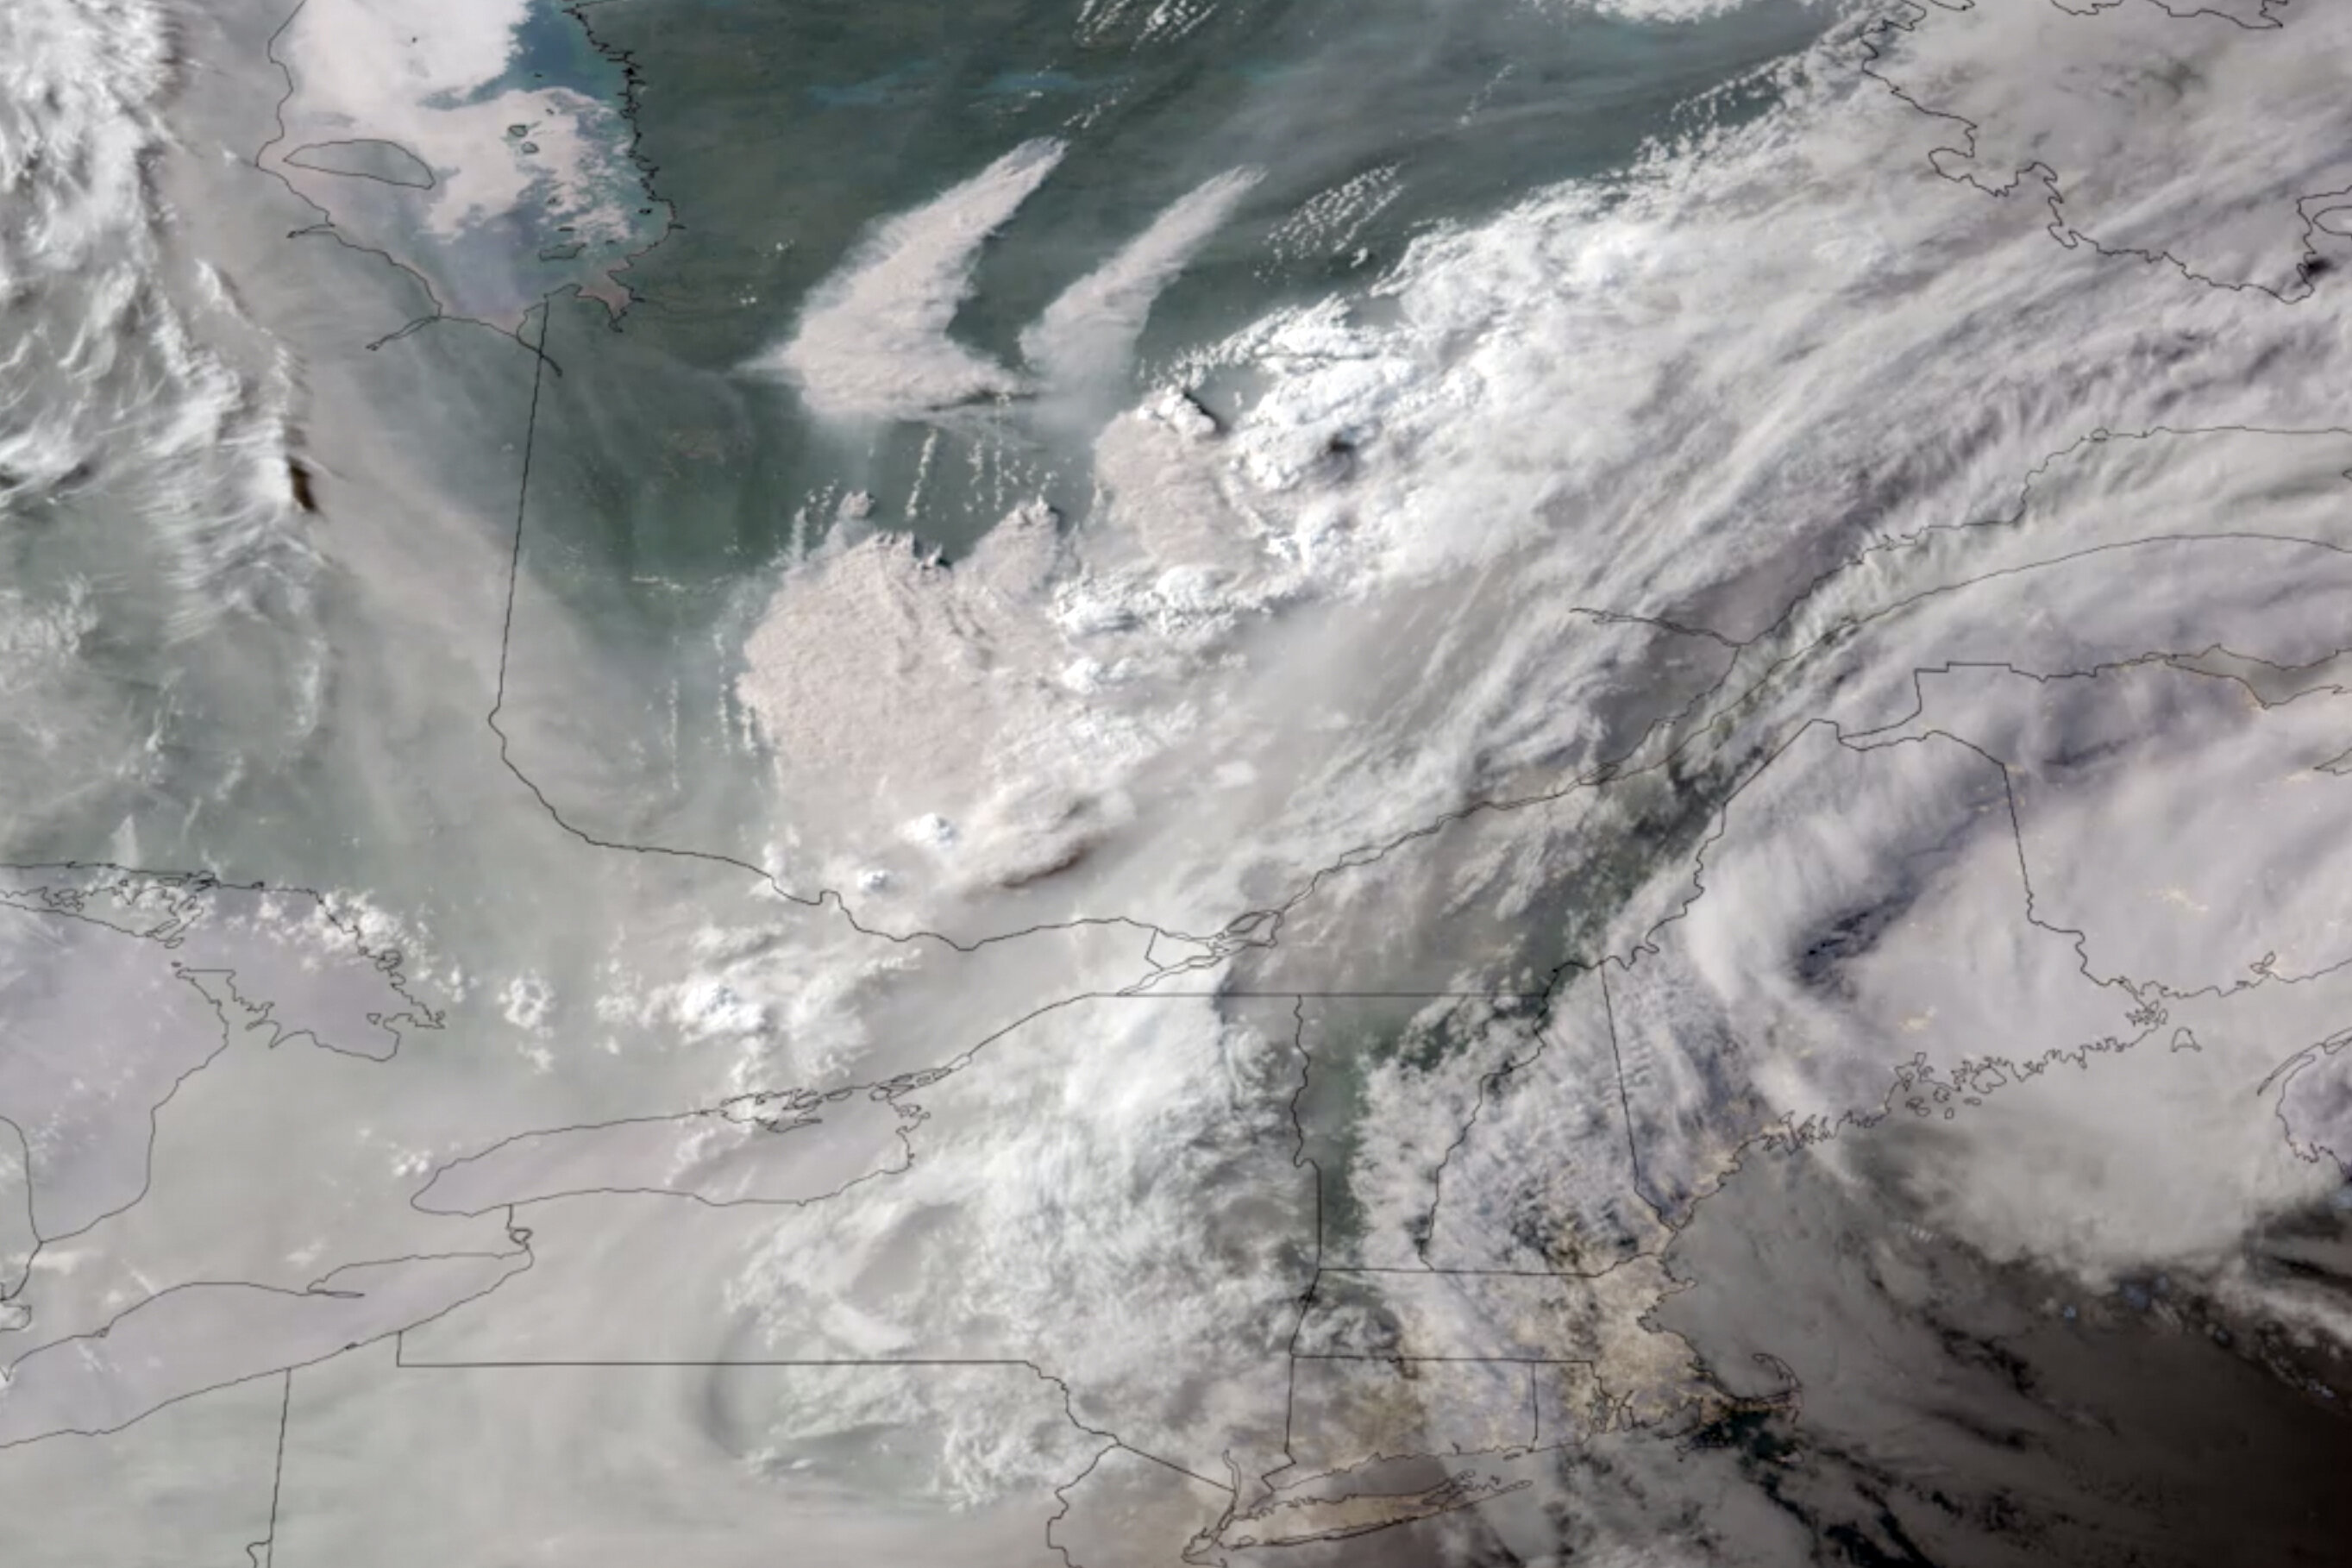 Air pollution cloaks eastern US for a second day. Here's why there is so much smoke